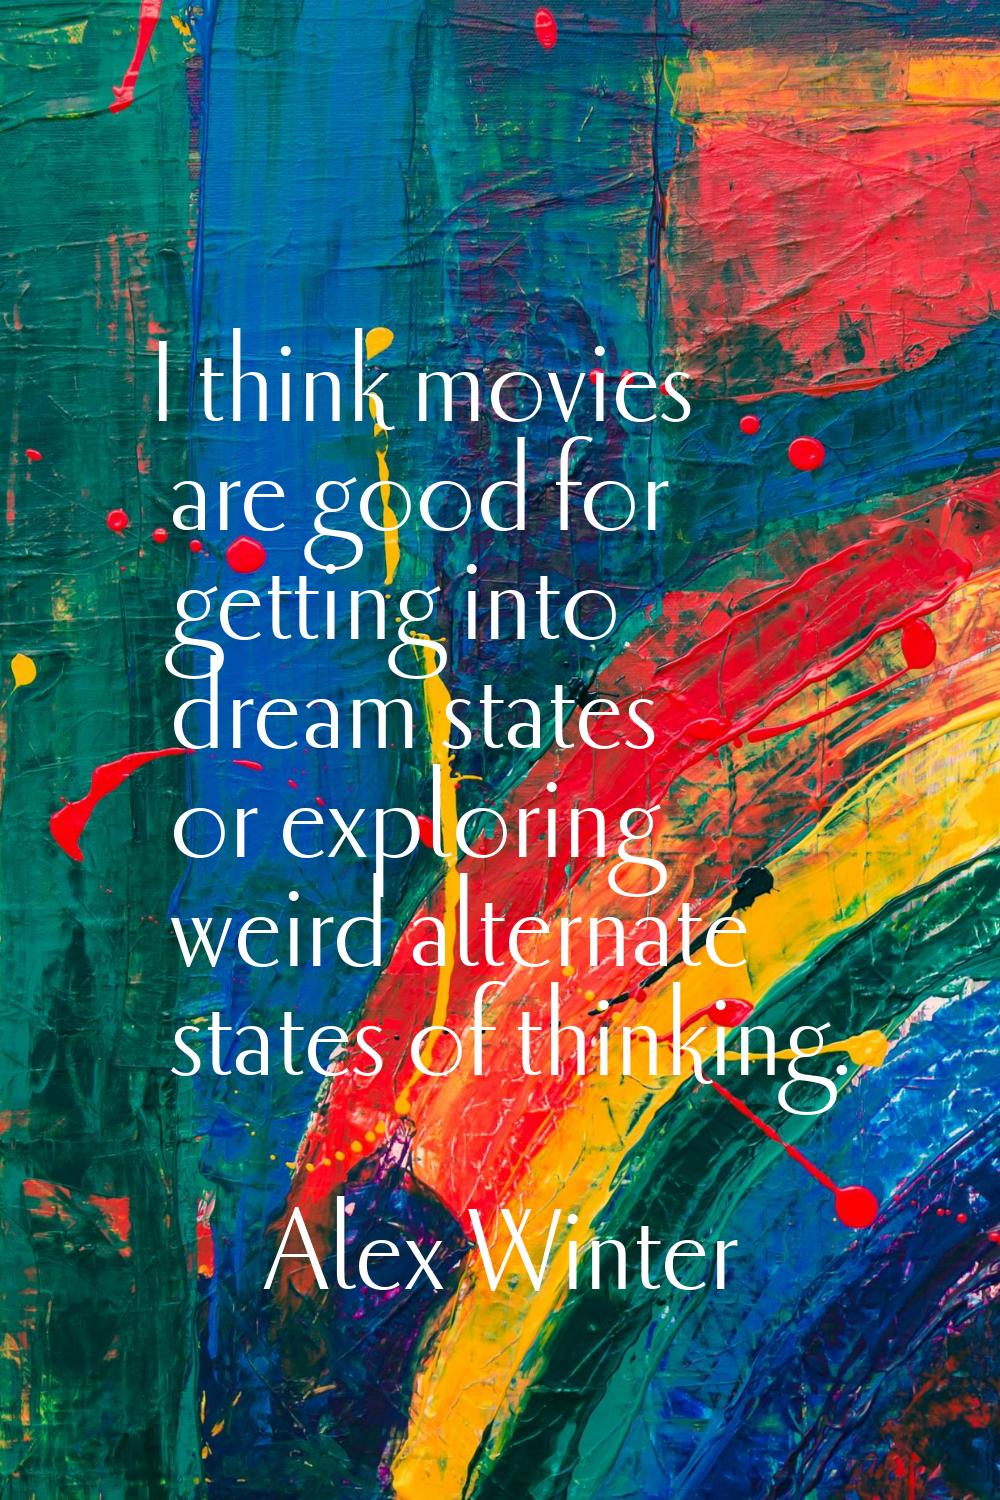 I think movies are good for getting into dream states or exploring weird alternate states of thinki